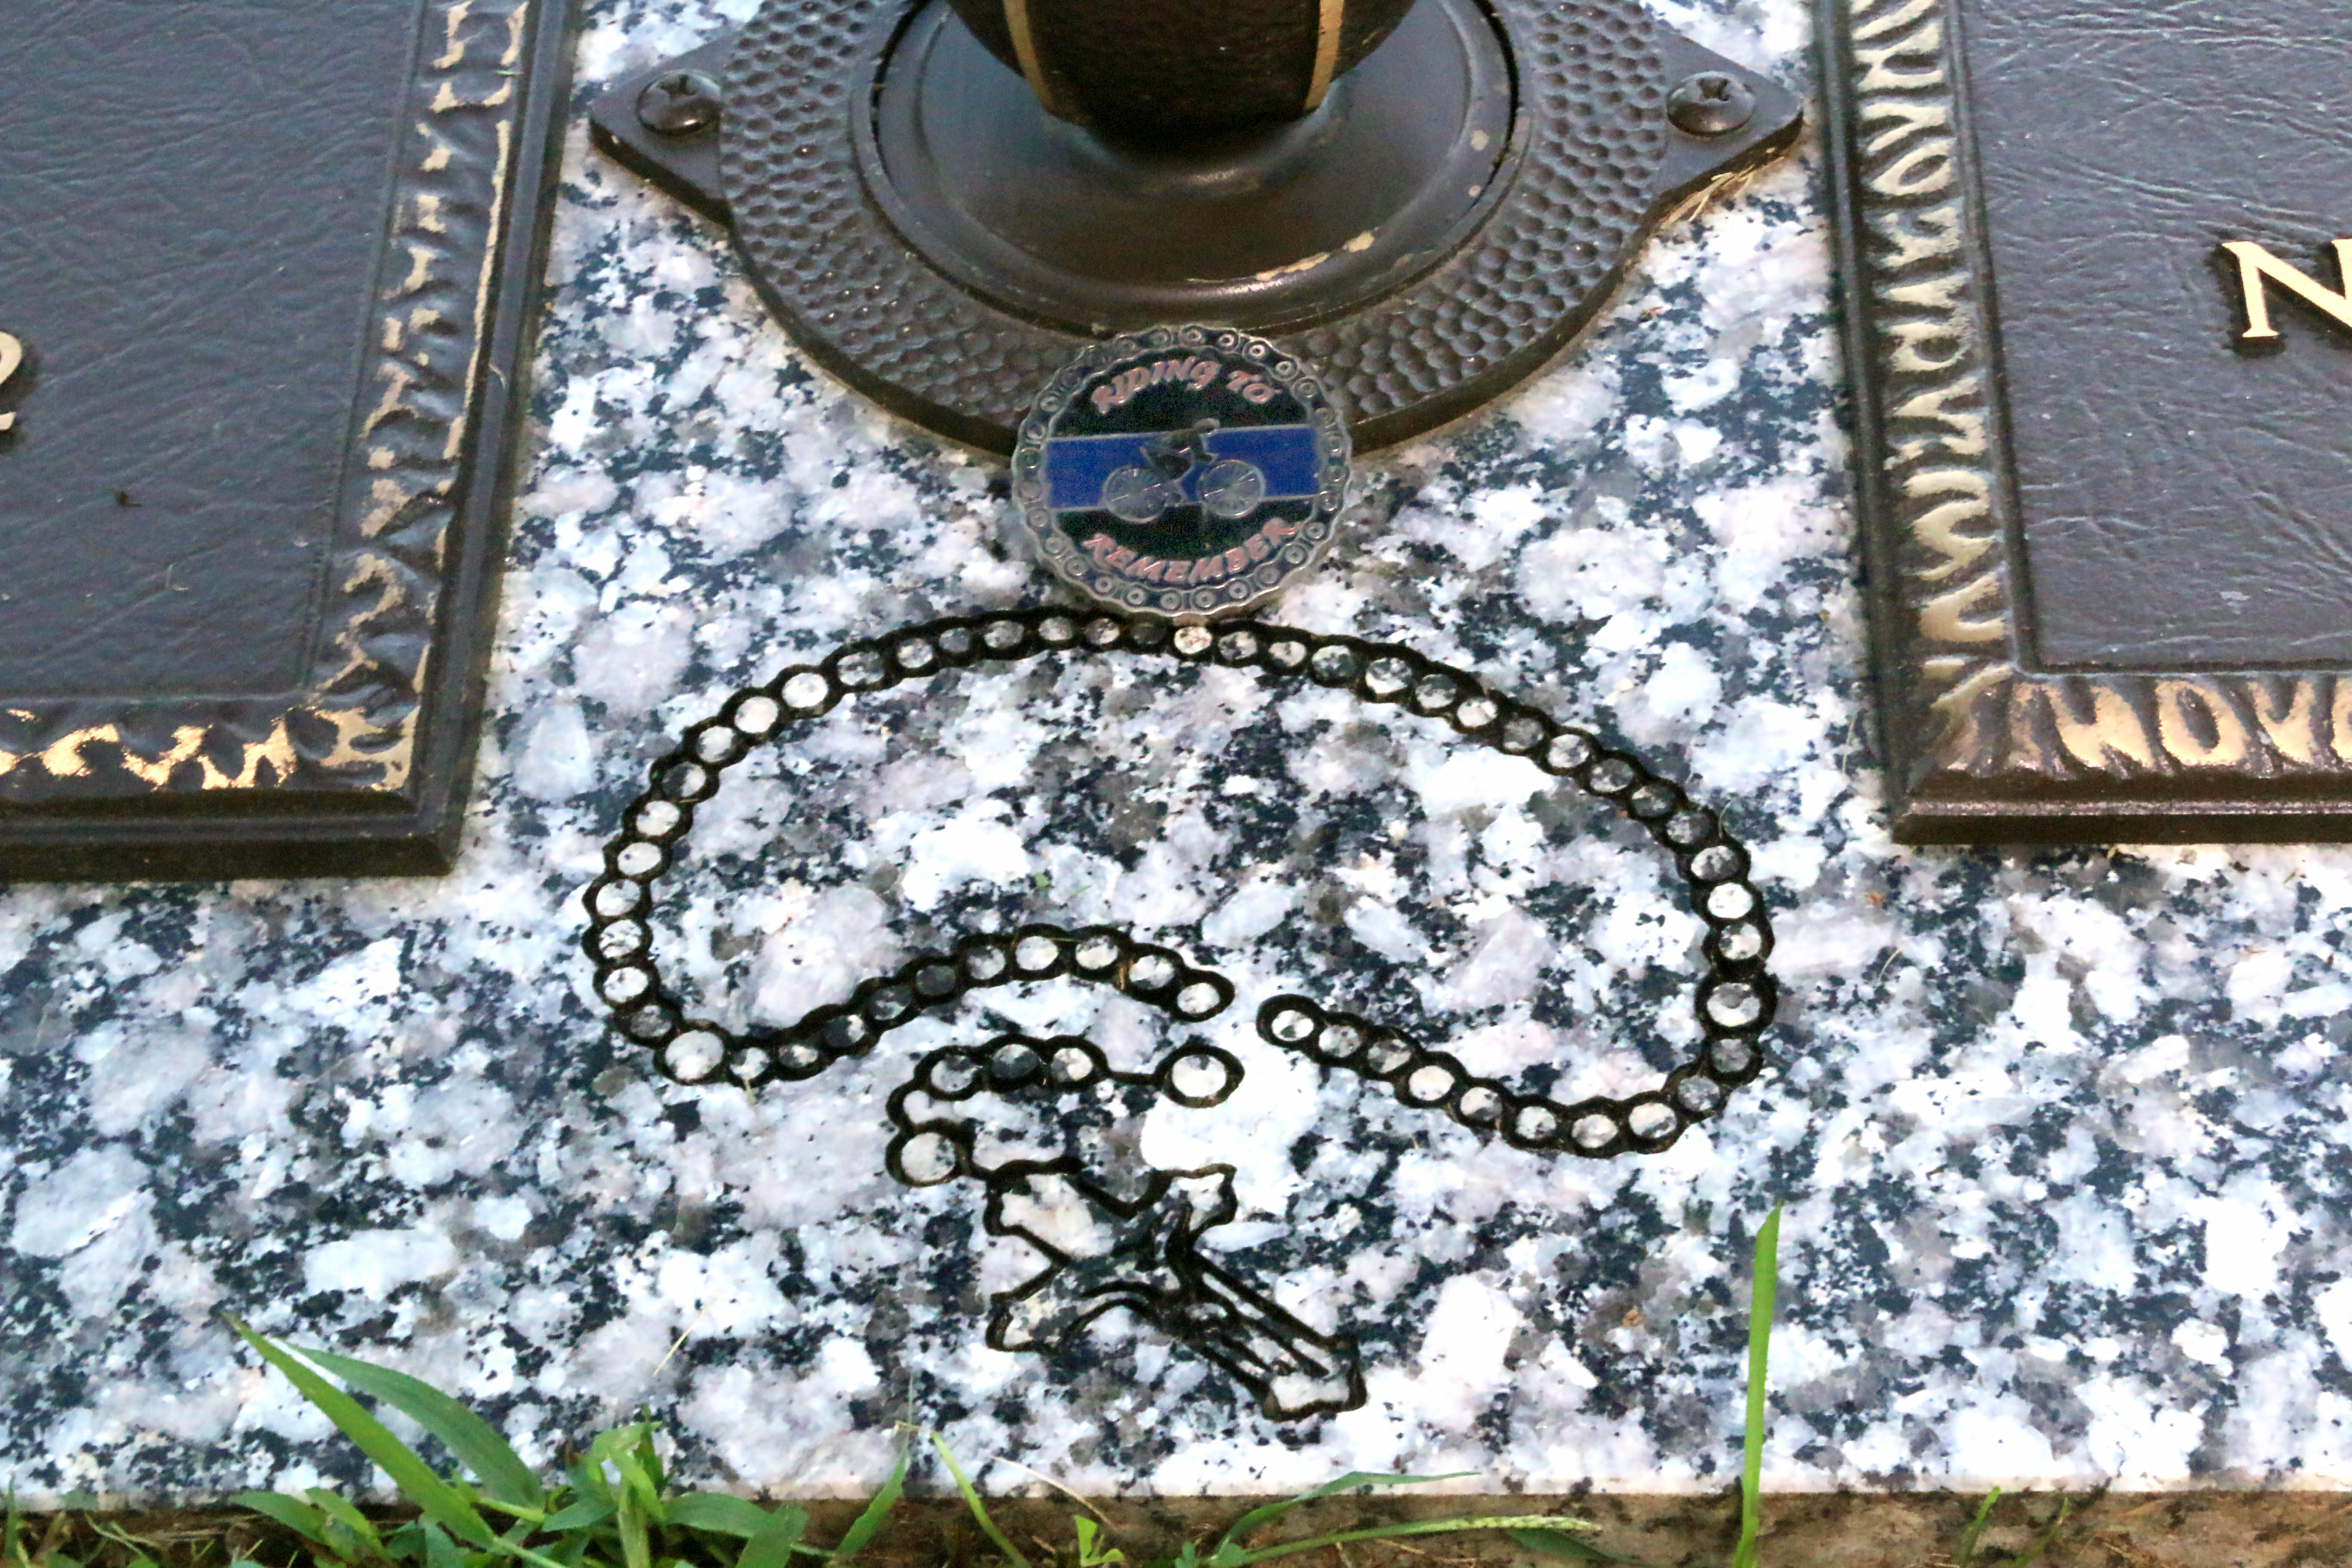 Headstone close-up - Rosary engraving